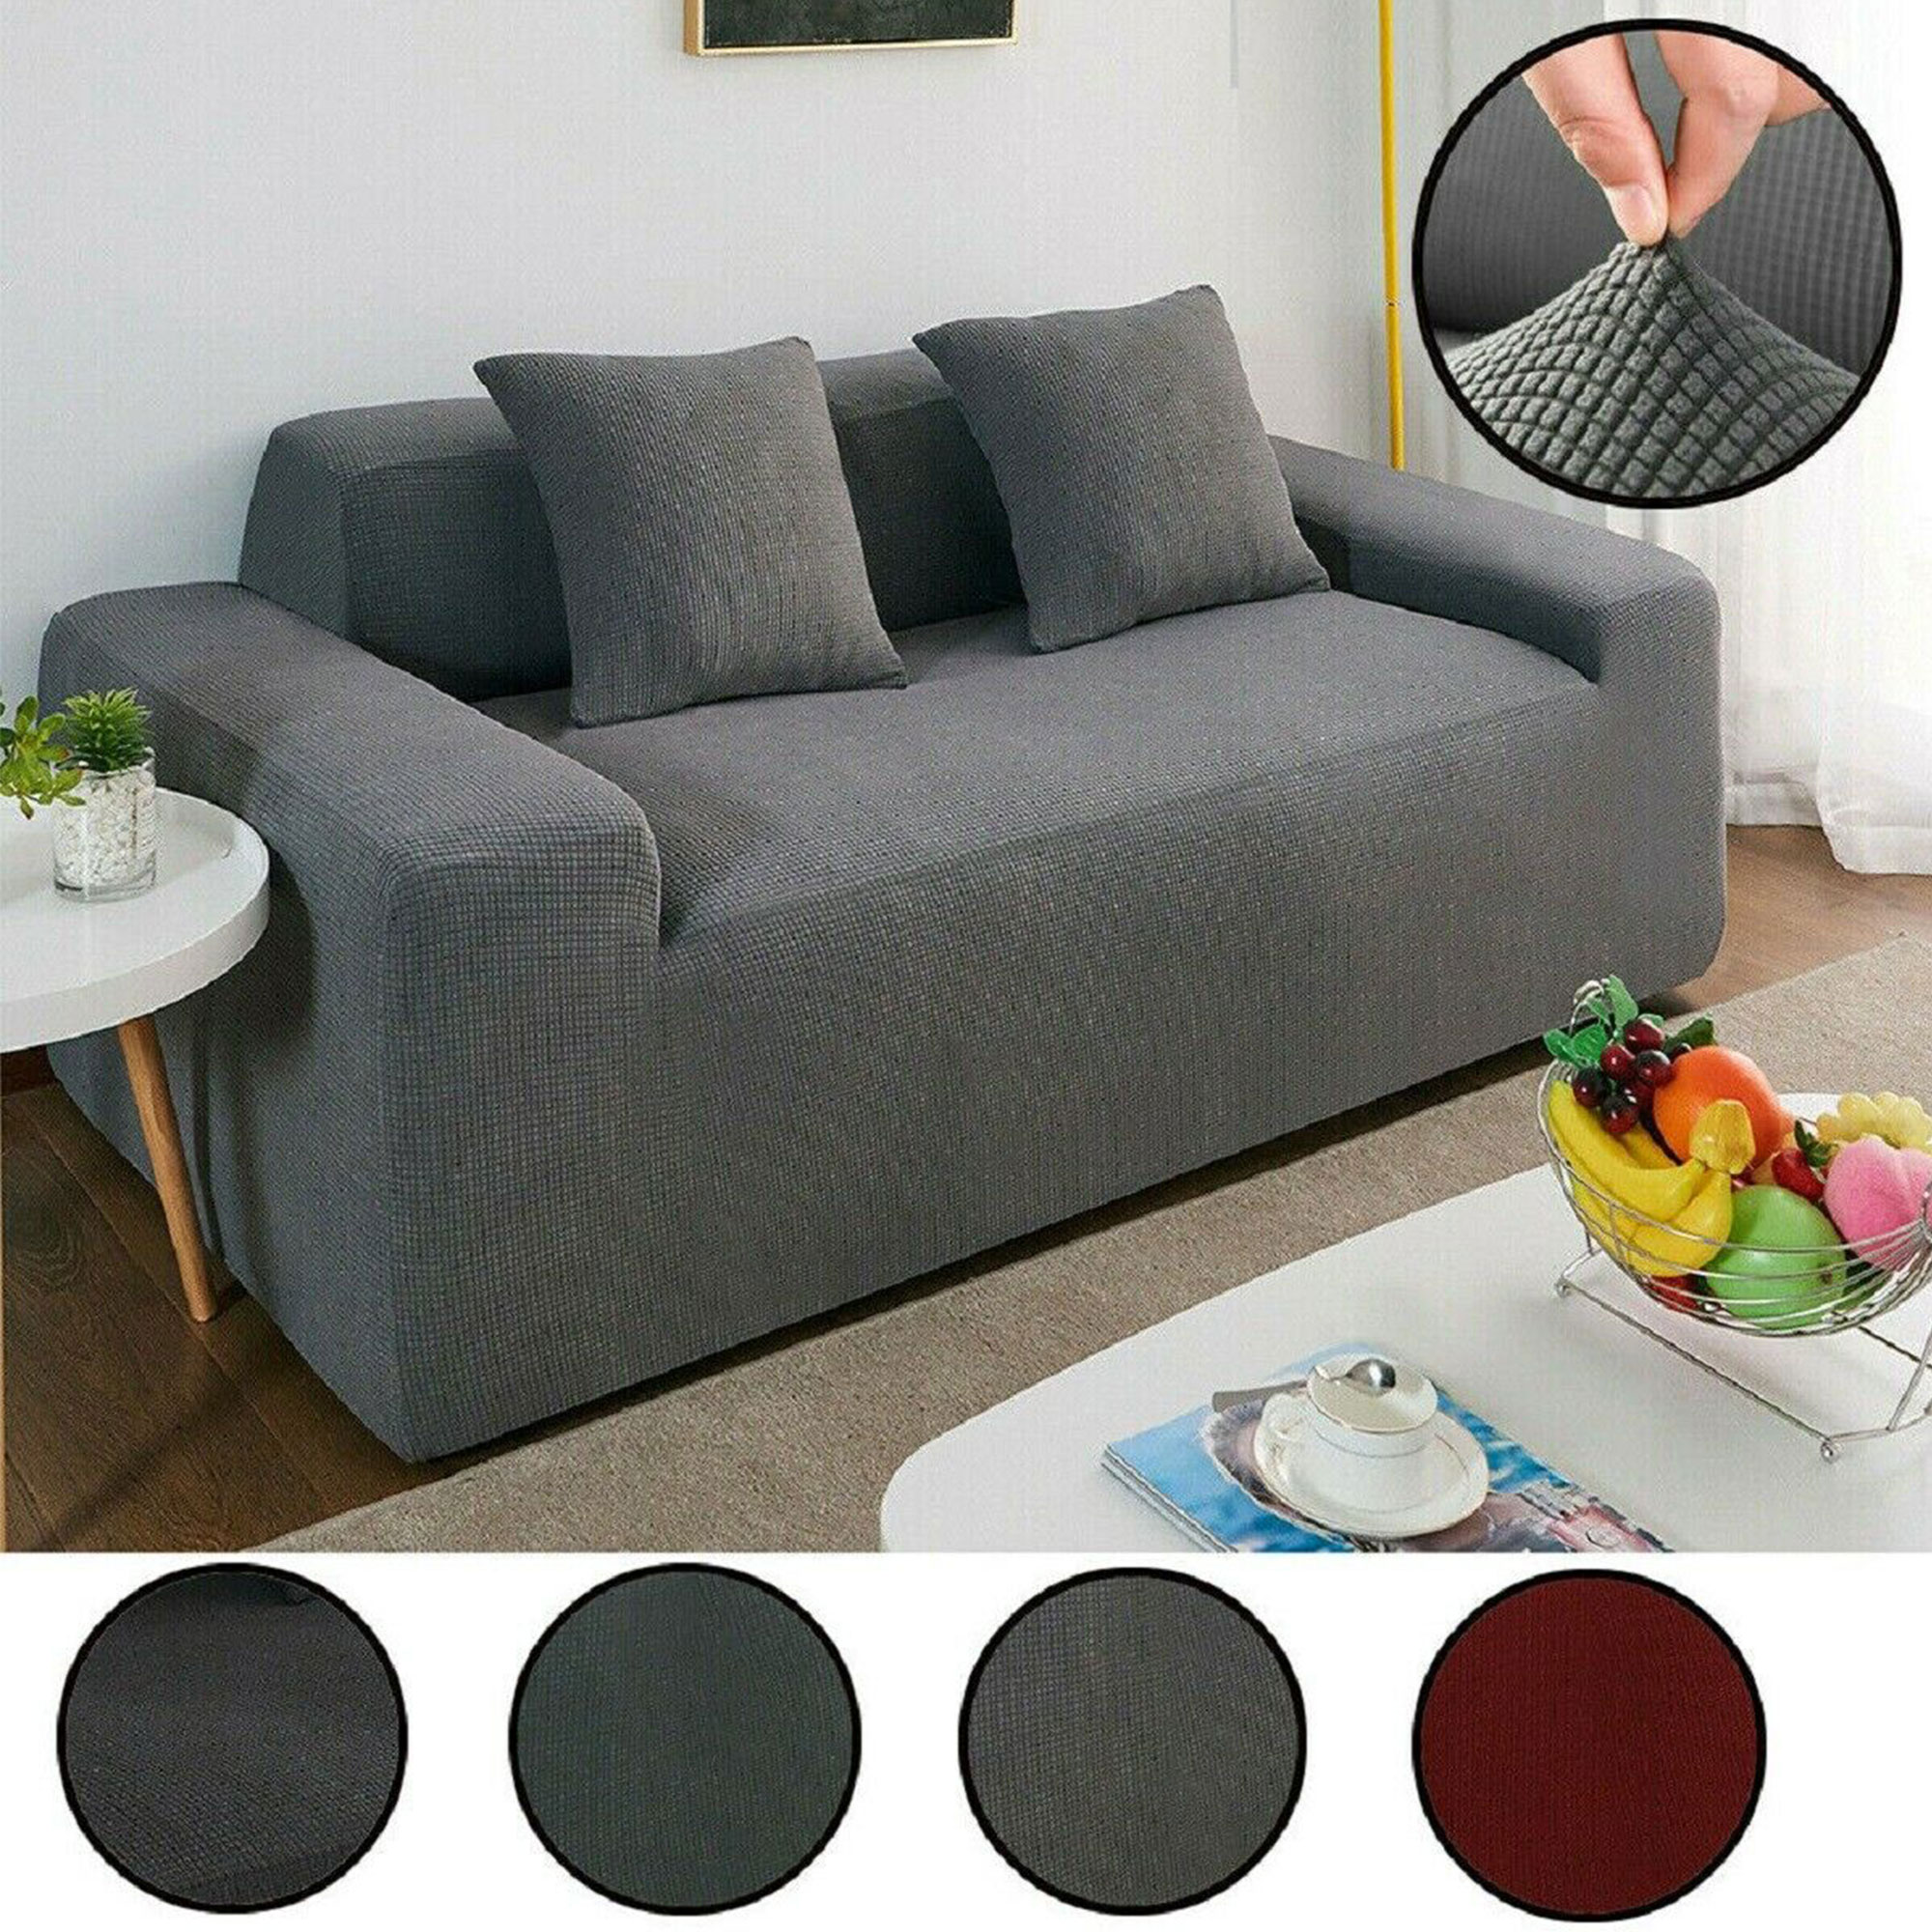 1 2 3 4 Seaters Elastic STRETCH SOFA COVERS-Slipcover Protector Settee Chair Arm Anti-Slip Furniture Couch Covers - image 1 of 3